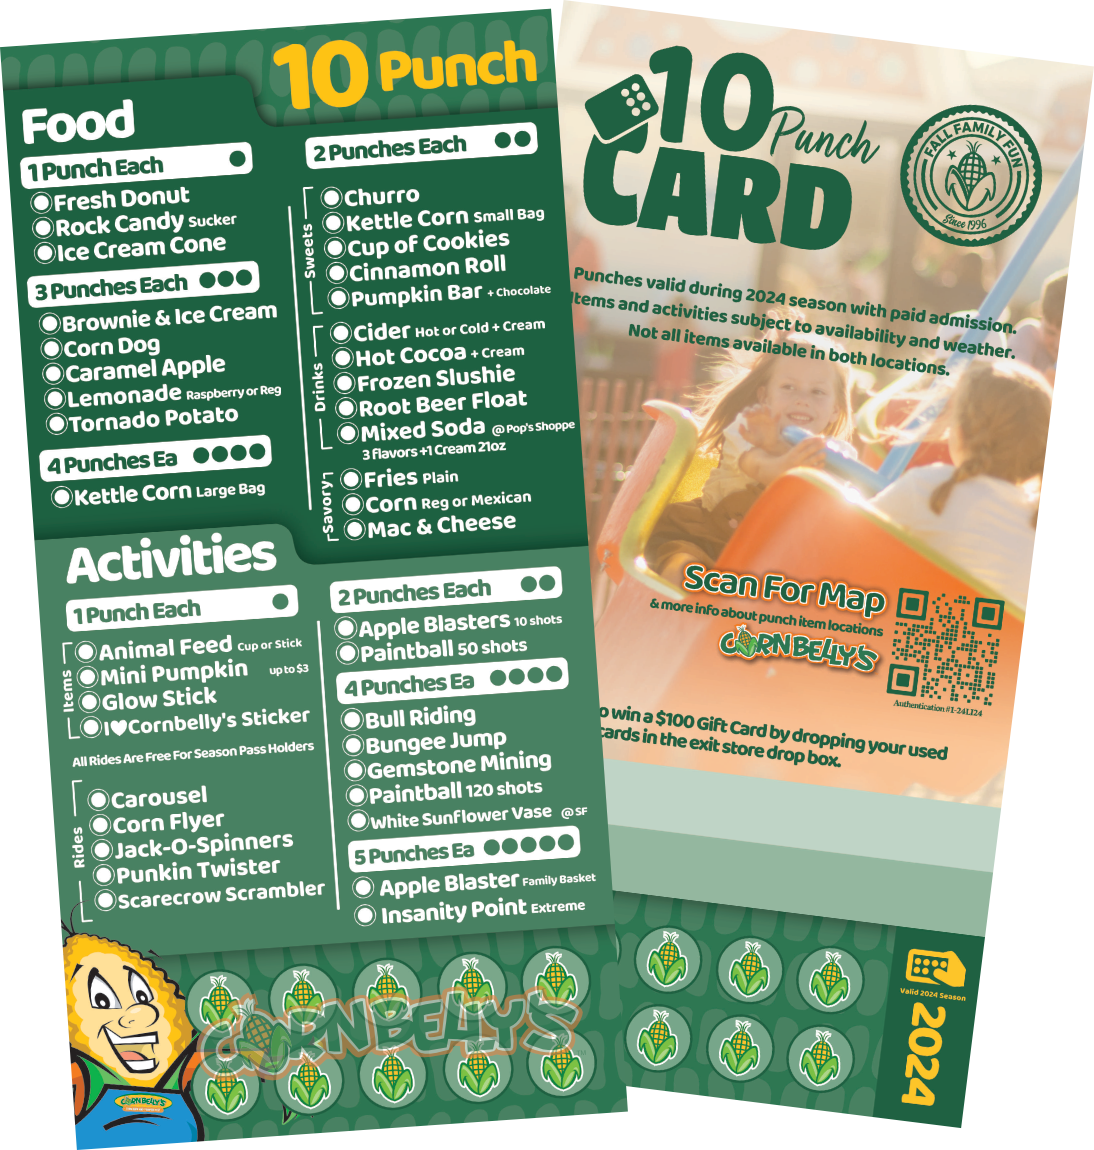 10 Punch Card